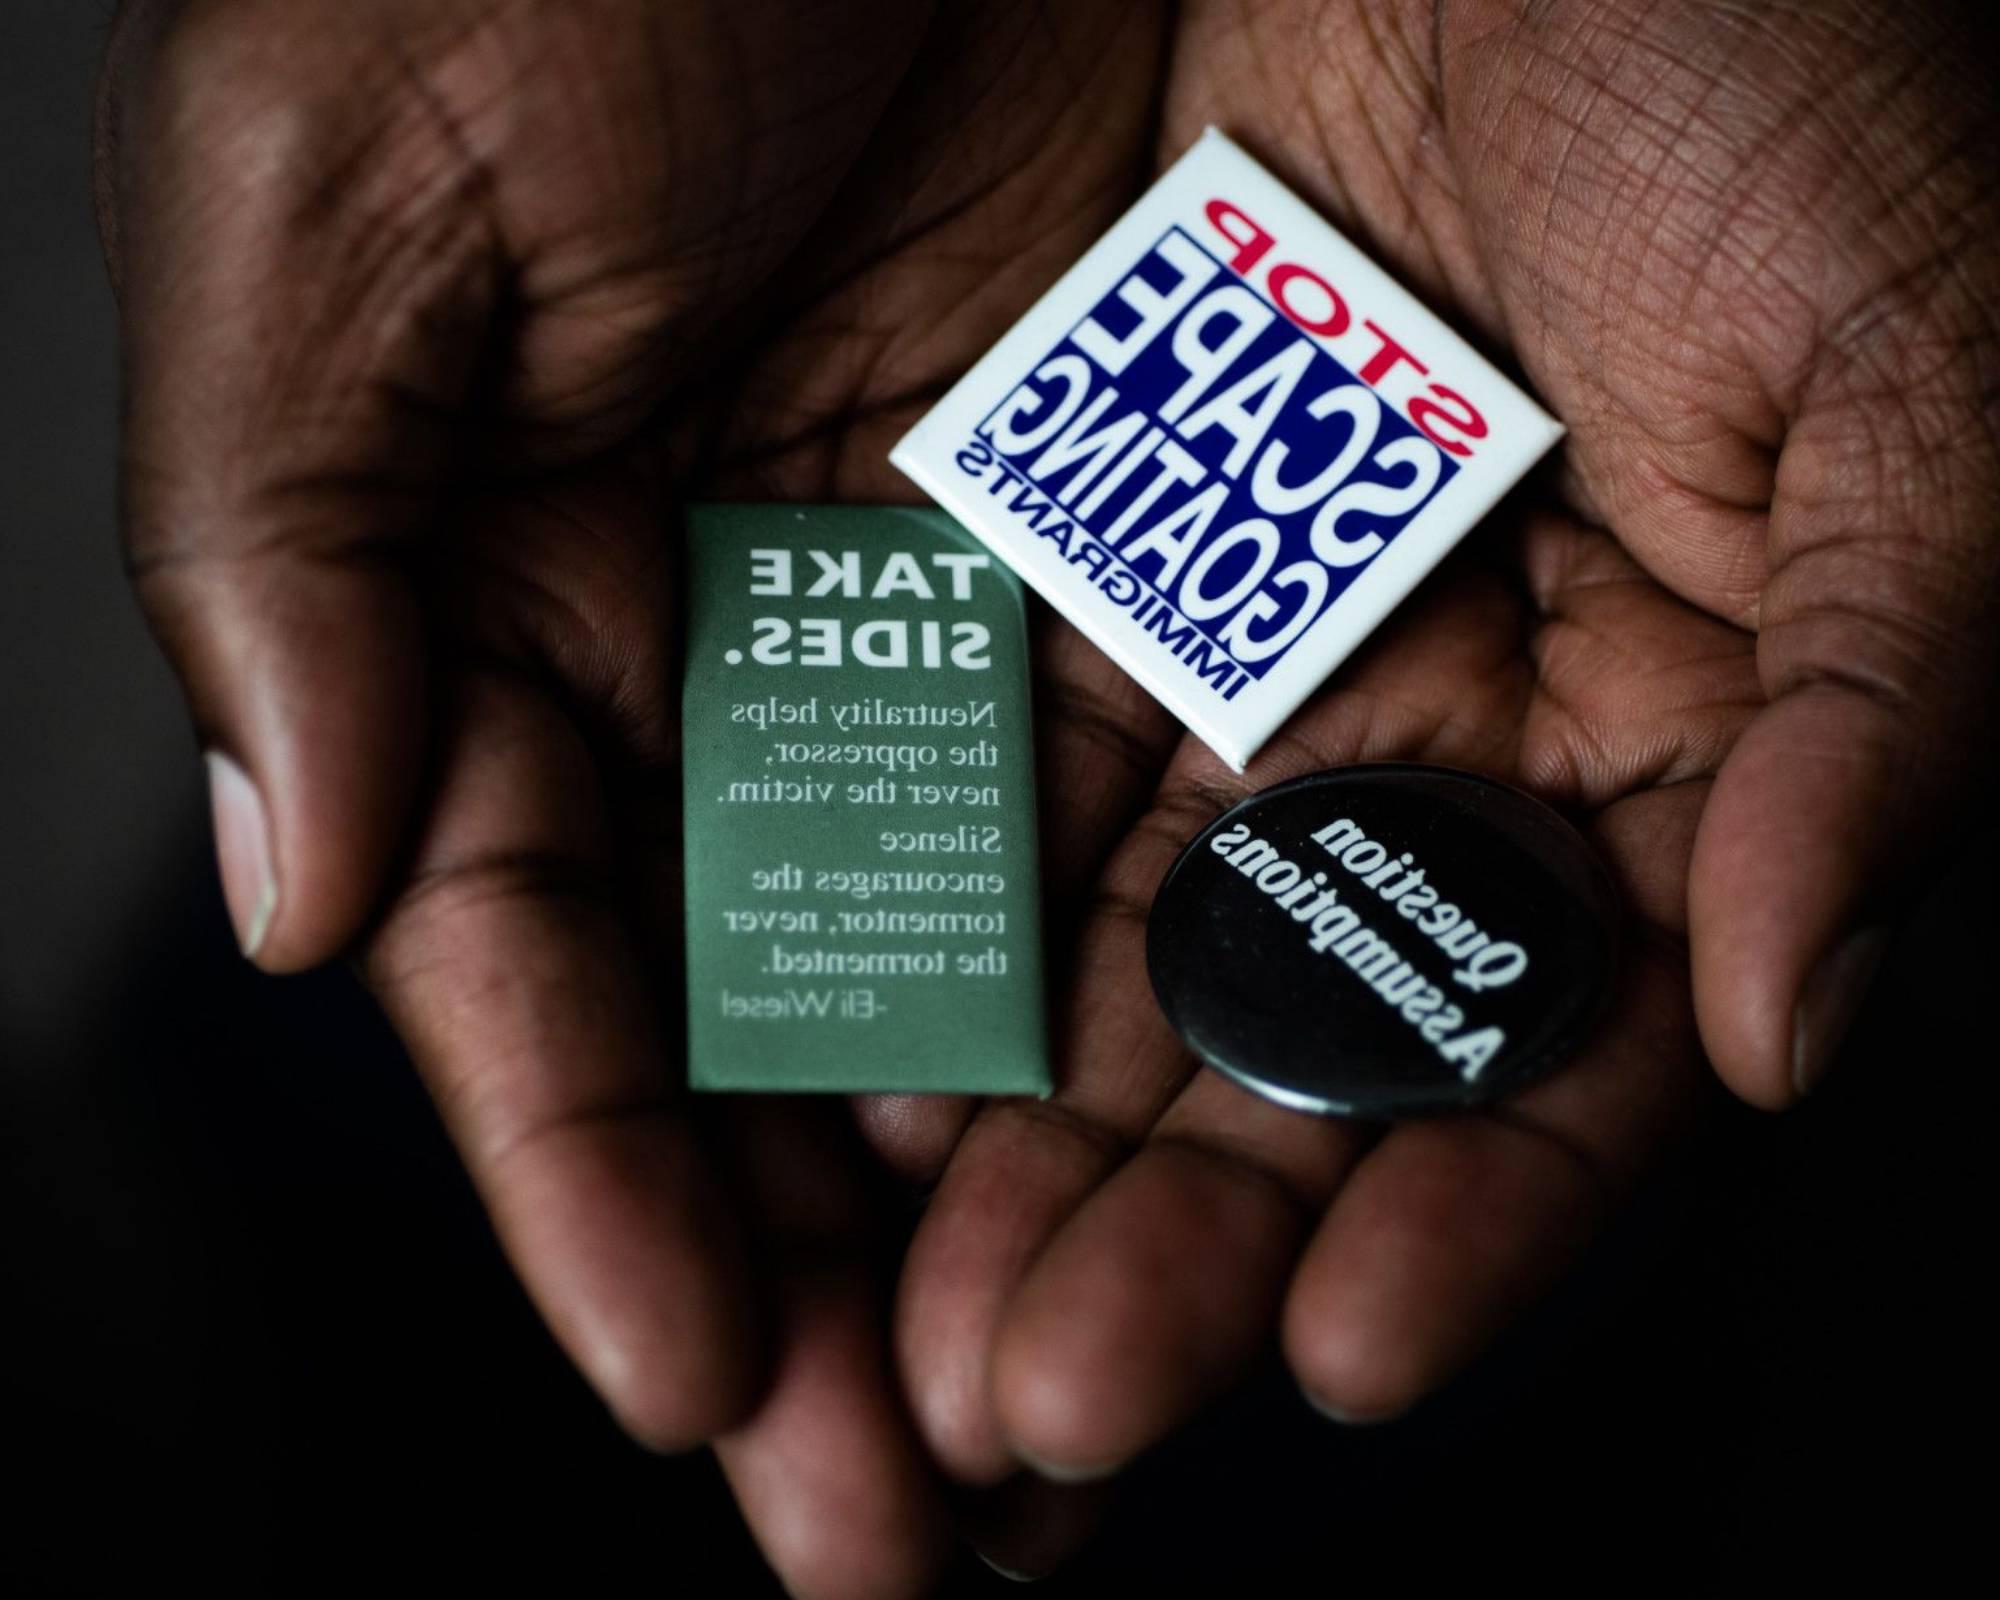 Cupped hands holding various social justice themed pins